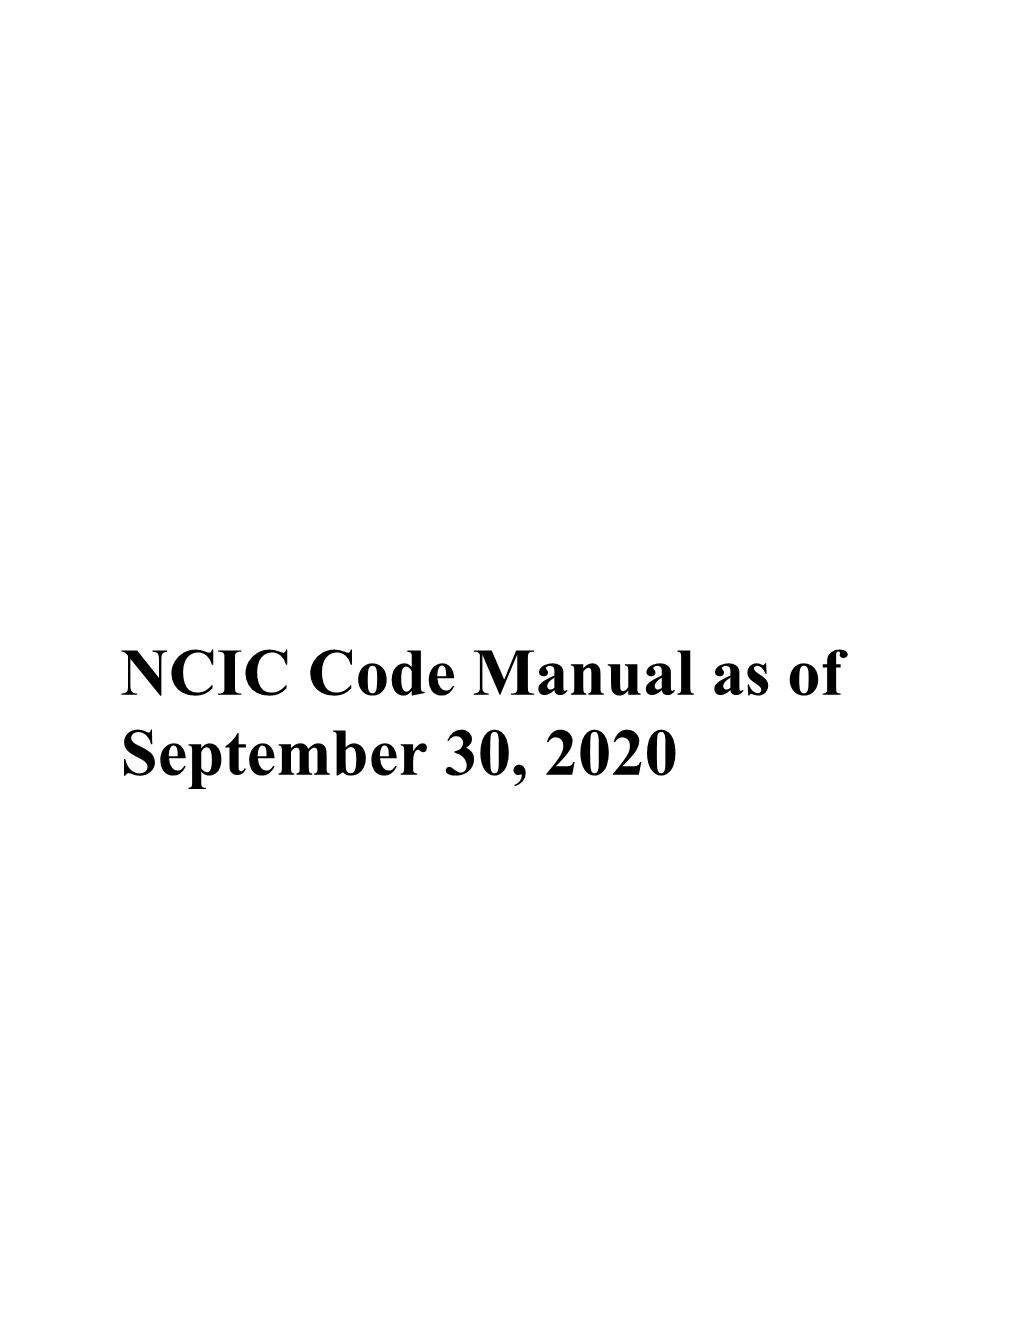 NCIC Code Manual As of September 30, 2020 NCIC Code Manual Table of Contents